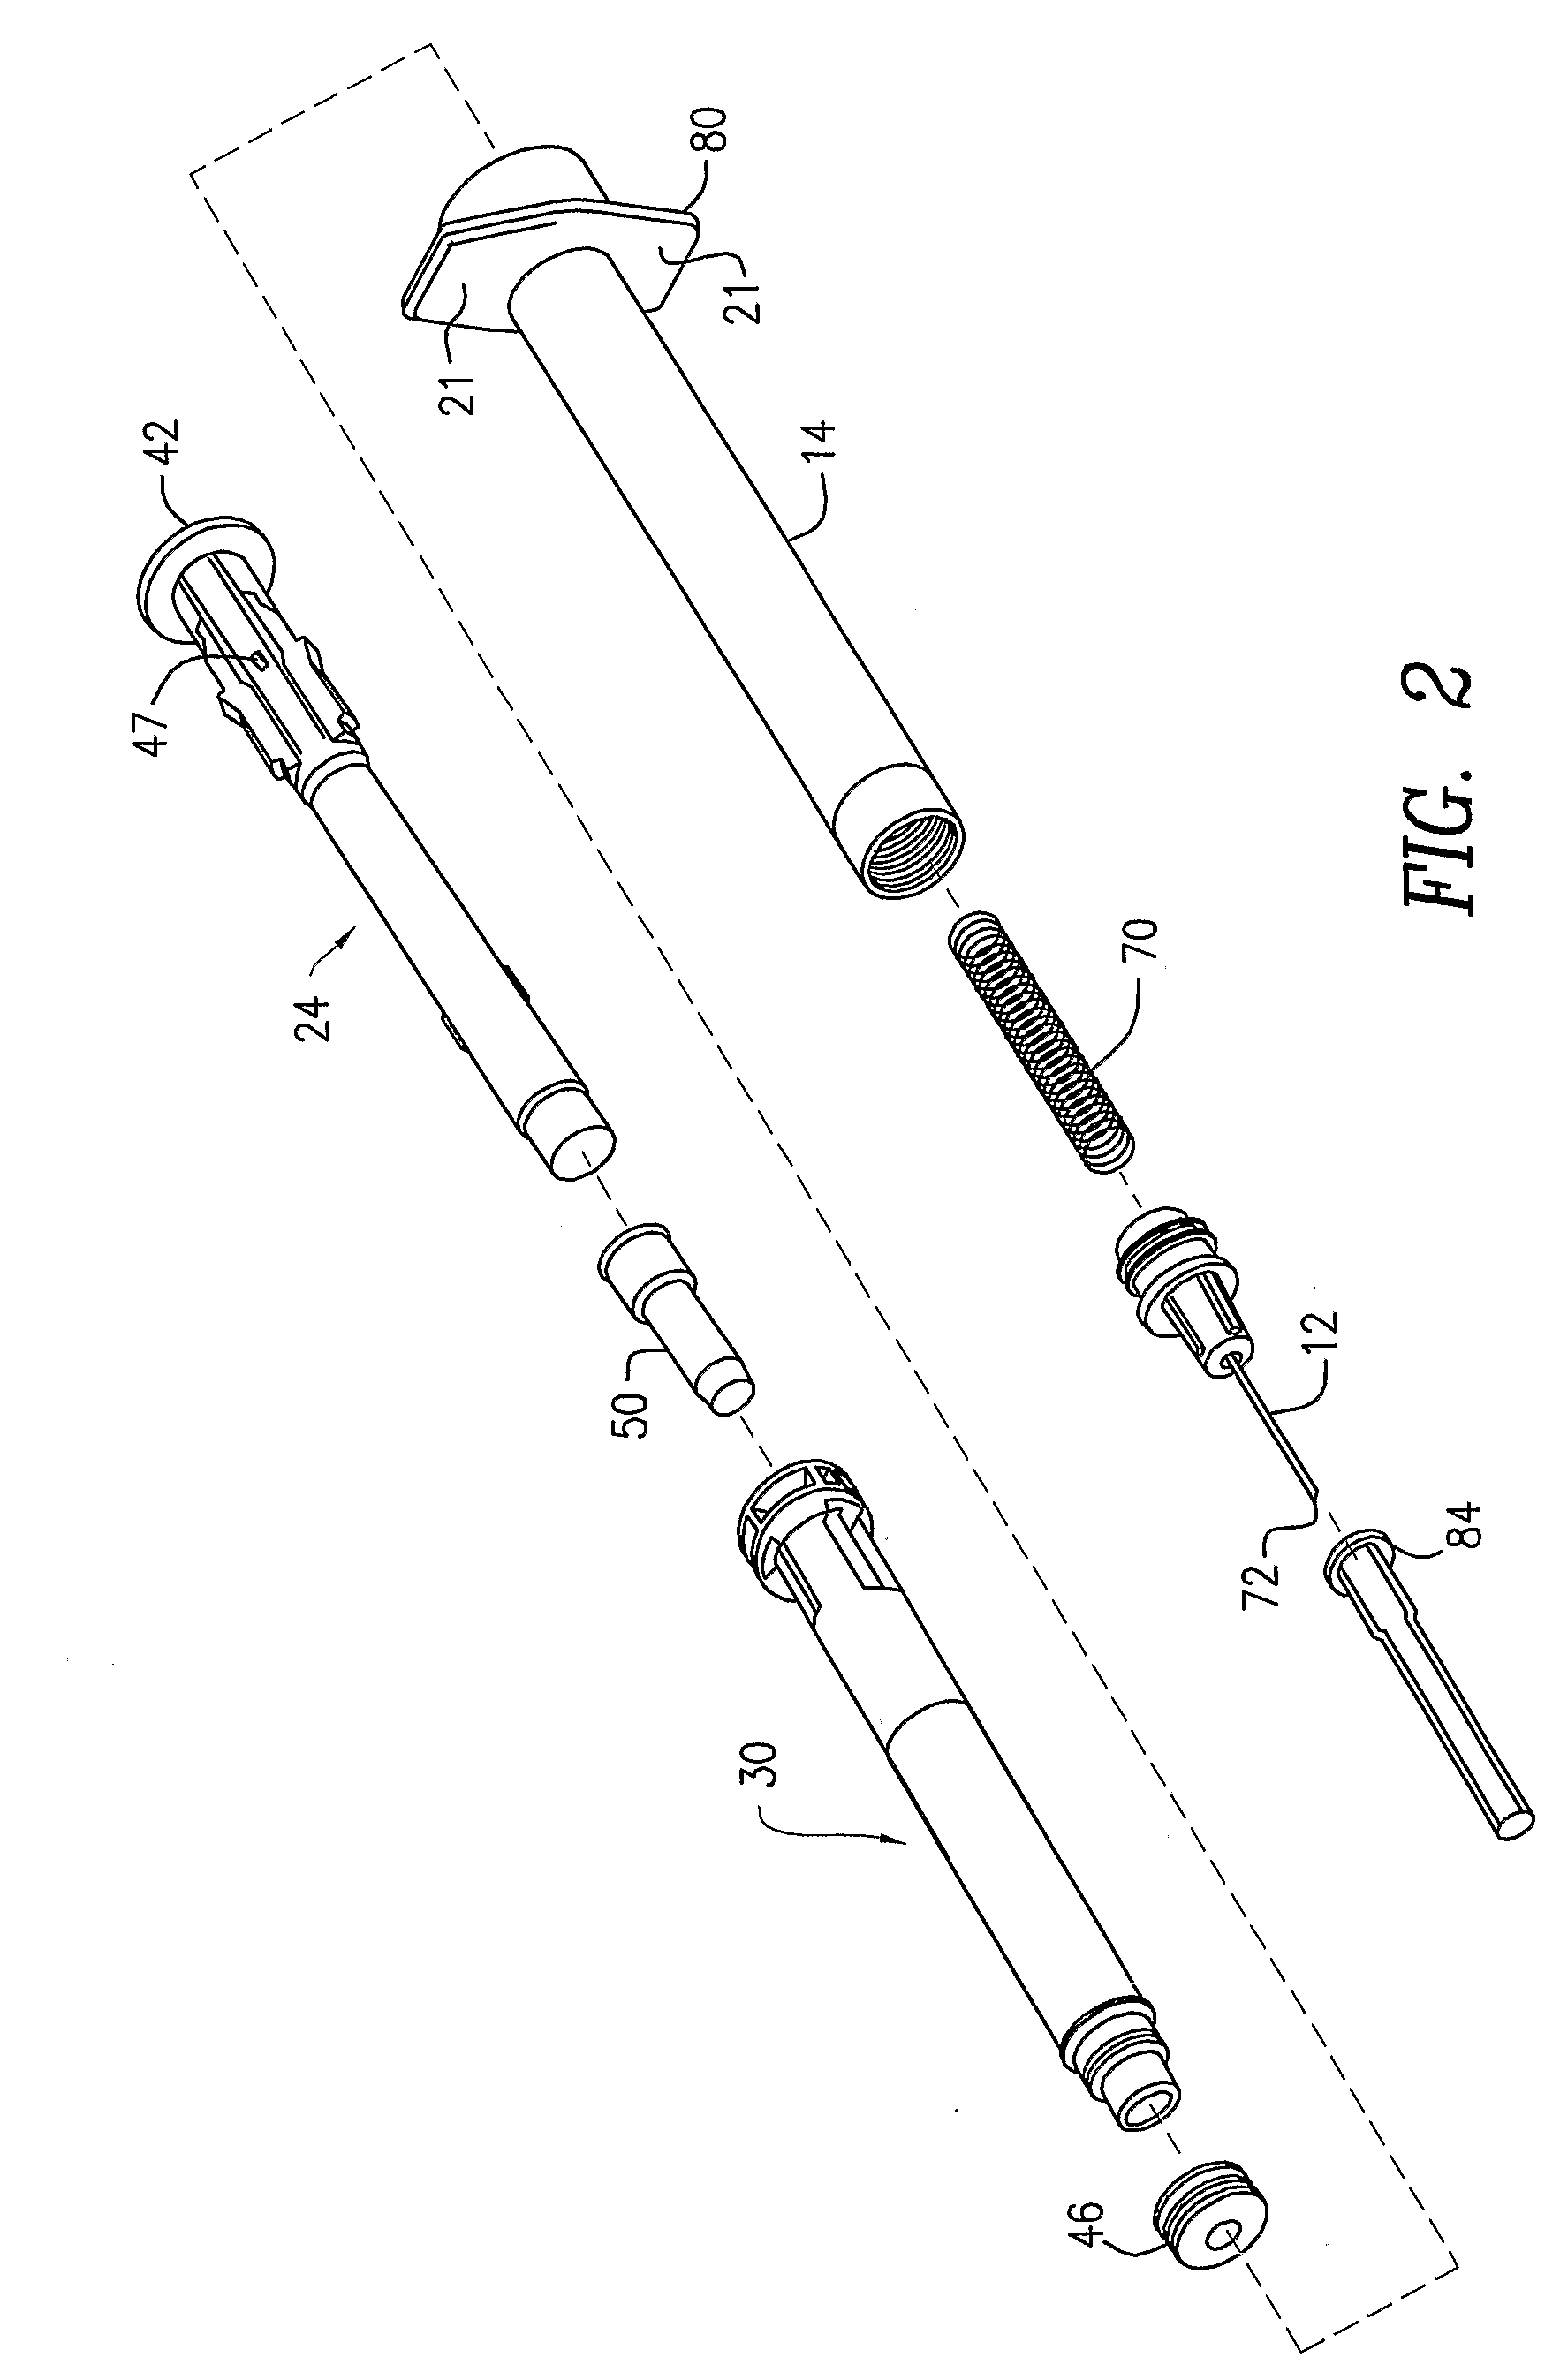 Retractable Needle Syringe Assembly